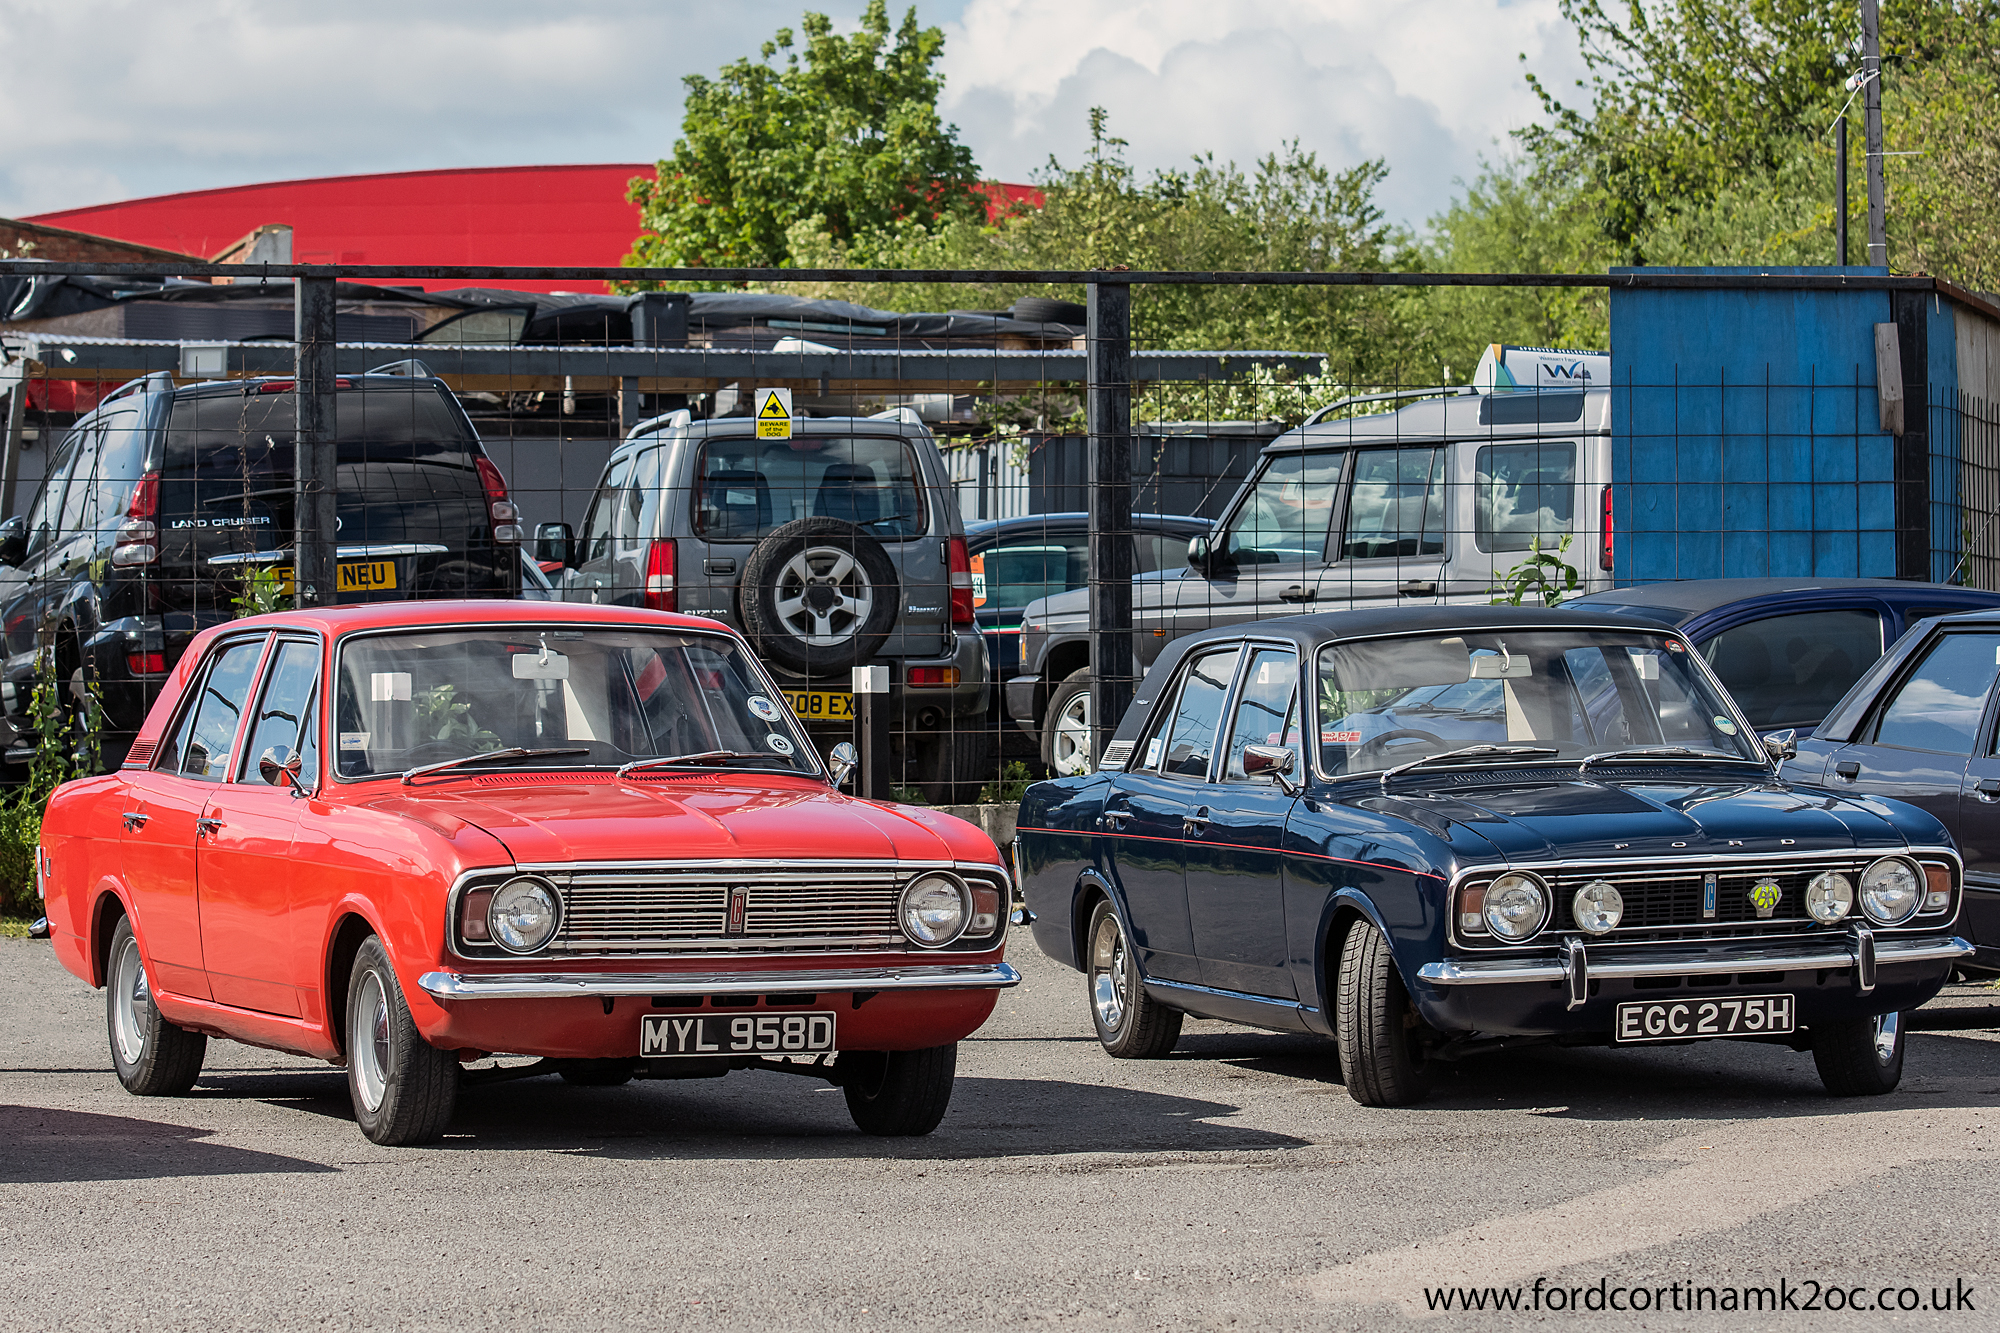 Cortinas at the Ace Cafe - Ford Cortina Mk2 Owners Club | Ford Cortina ...